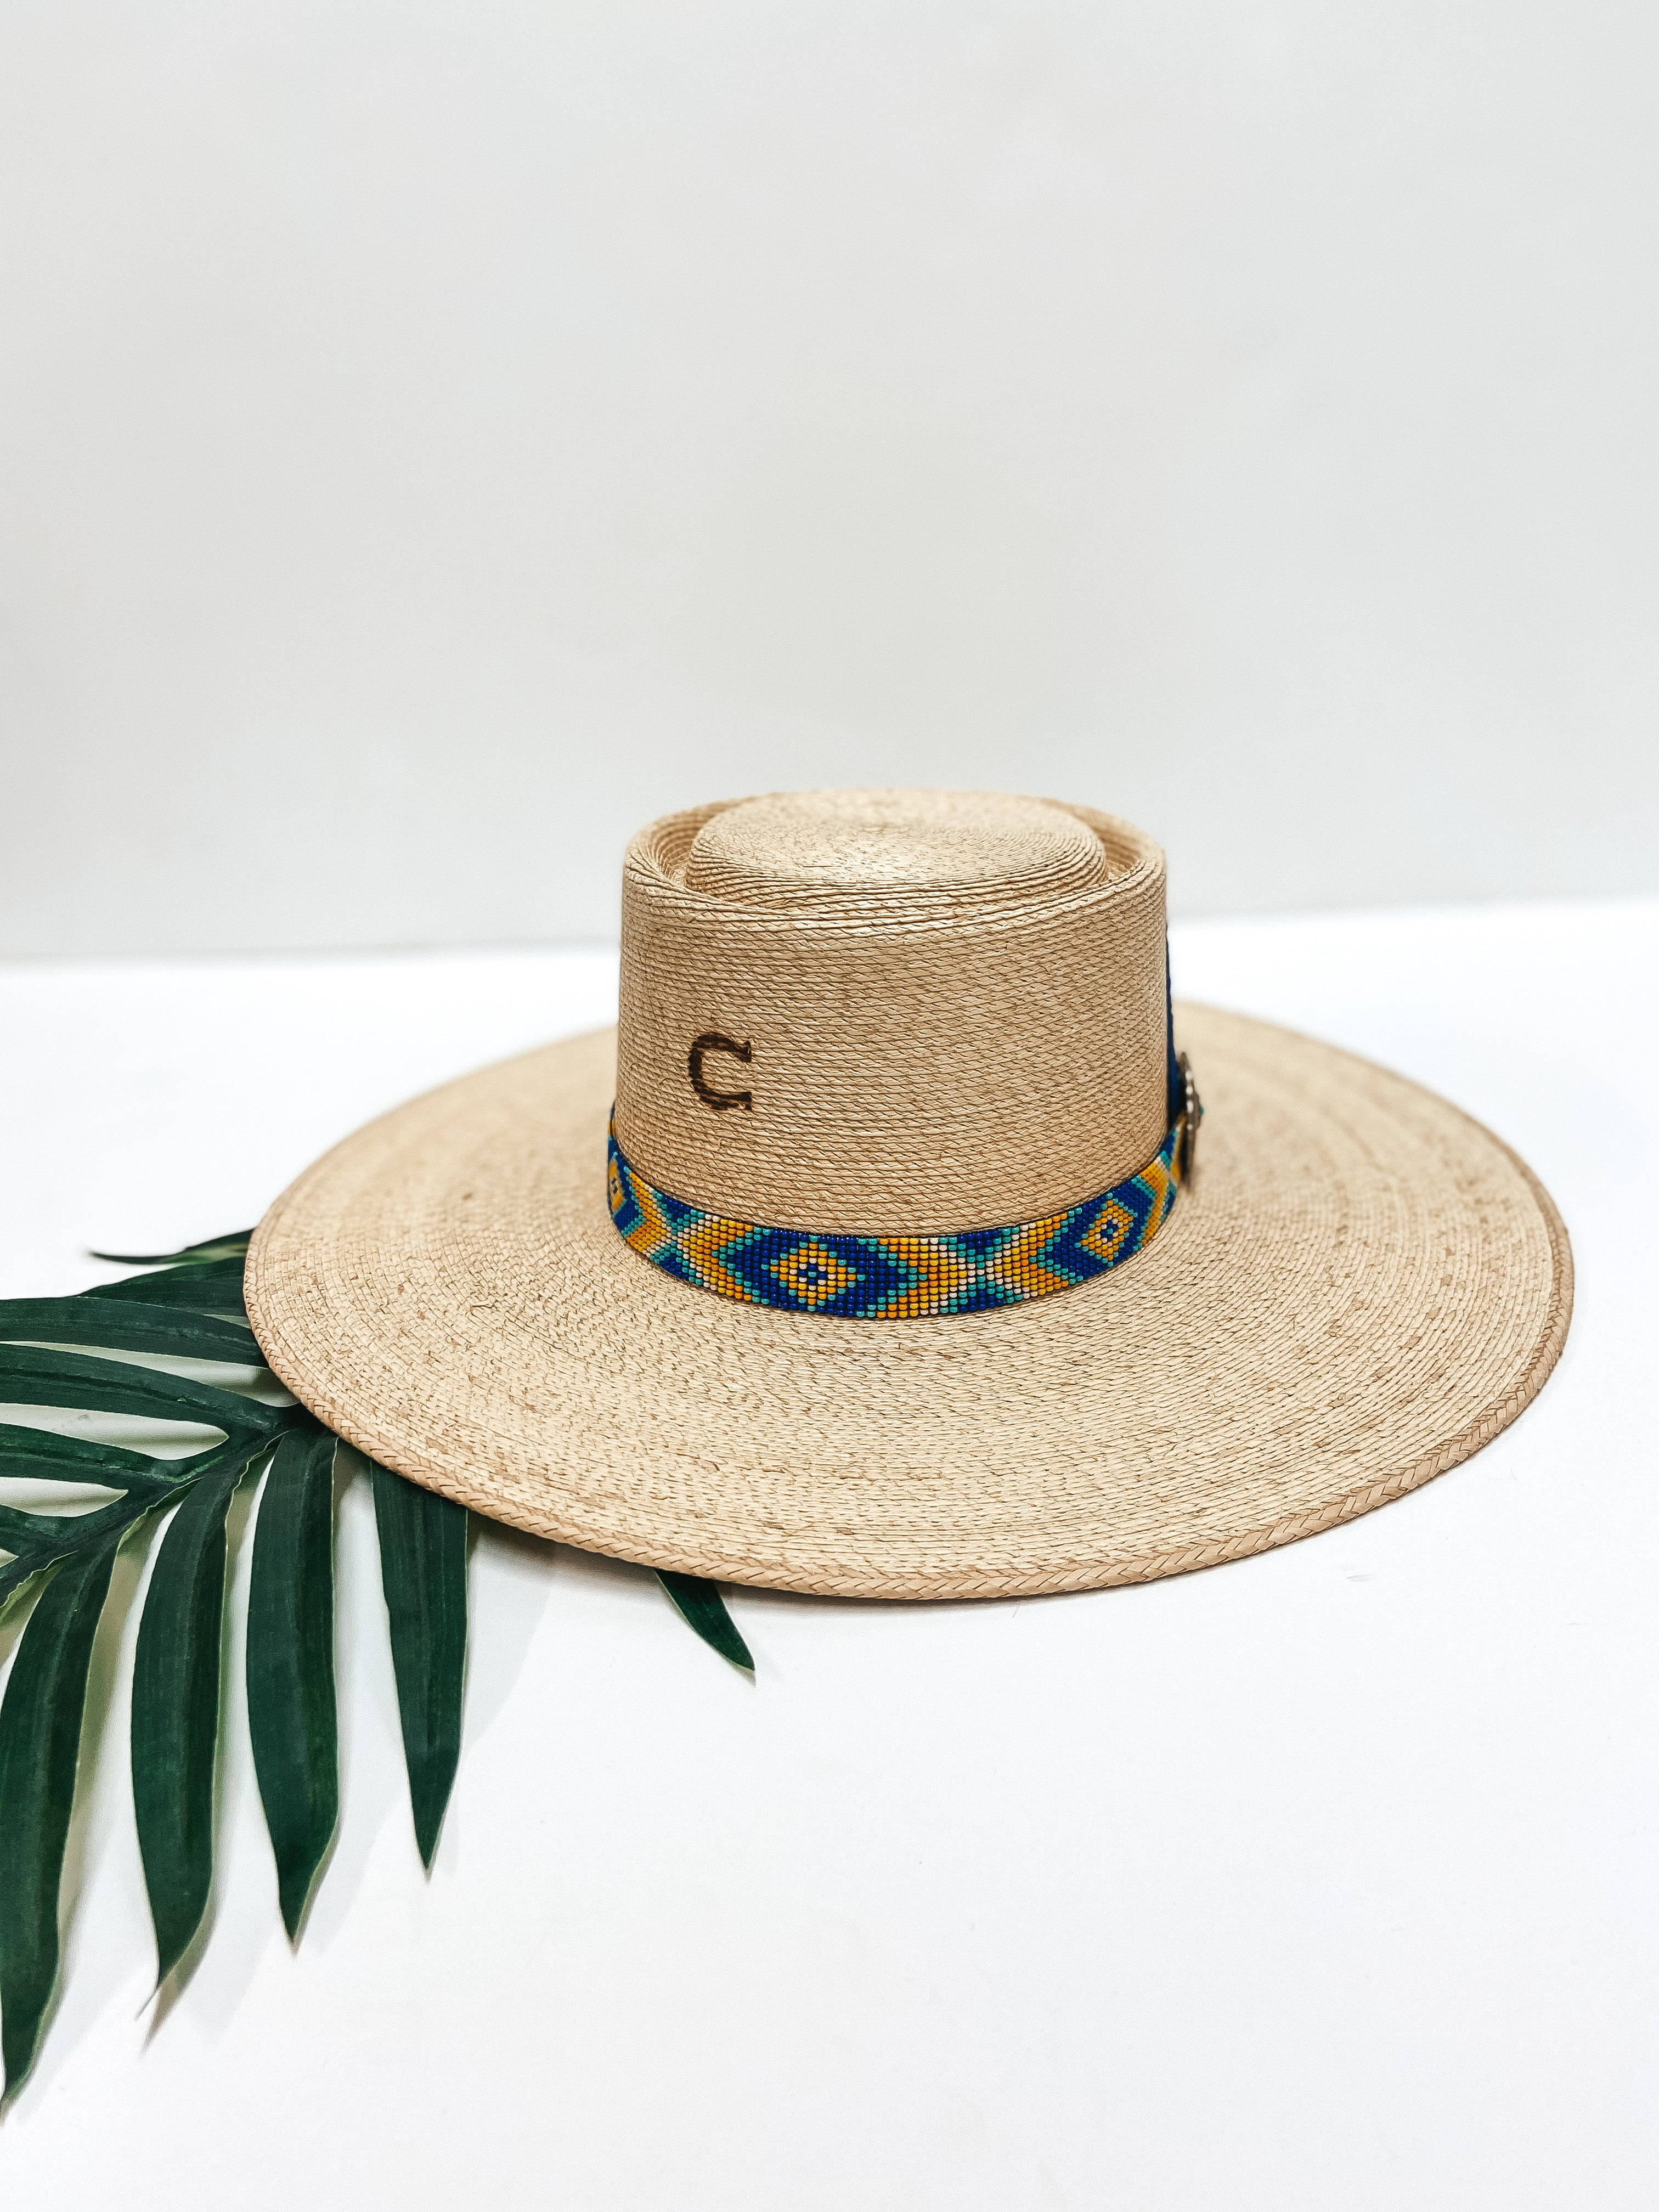 Charlie 1 Horse | Mamacita Palm Leaf Hat with Beaded Band and Leather Feather - Giddy Up Glamour Boutique